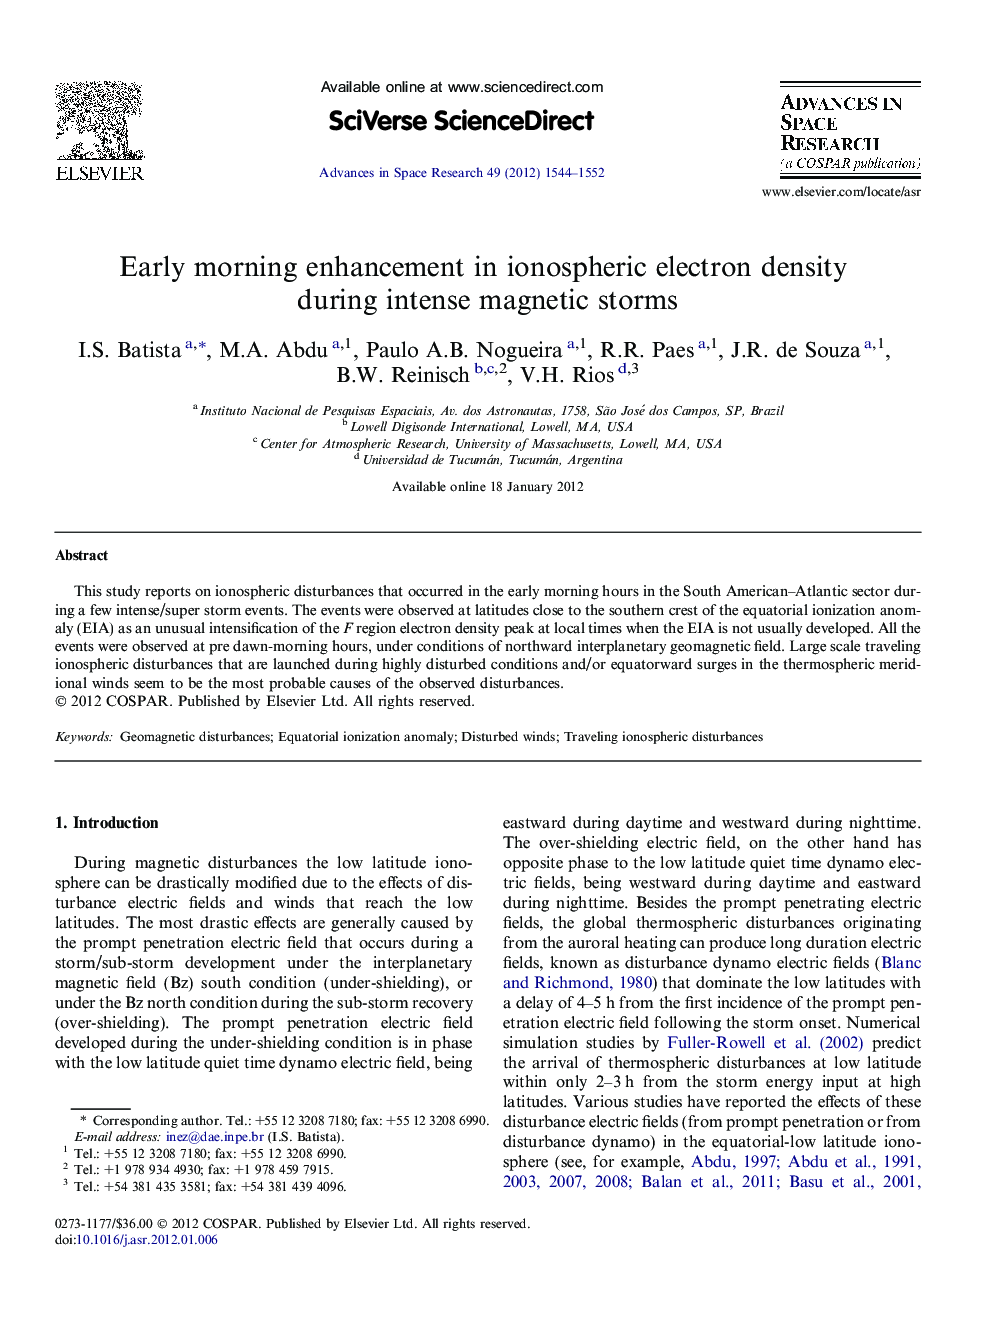 Early morning enhancement in ionospheric electron density during intense magnetic storms